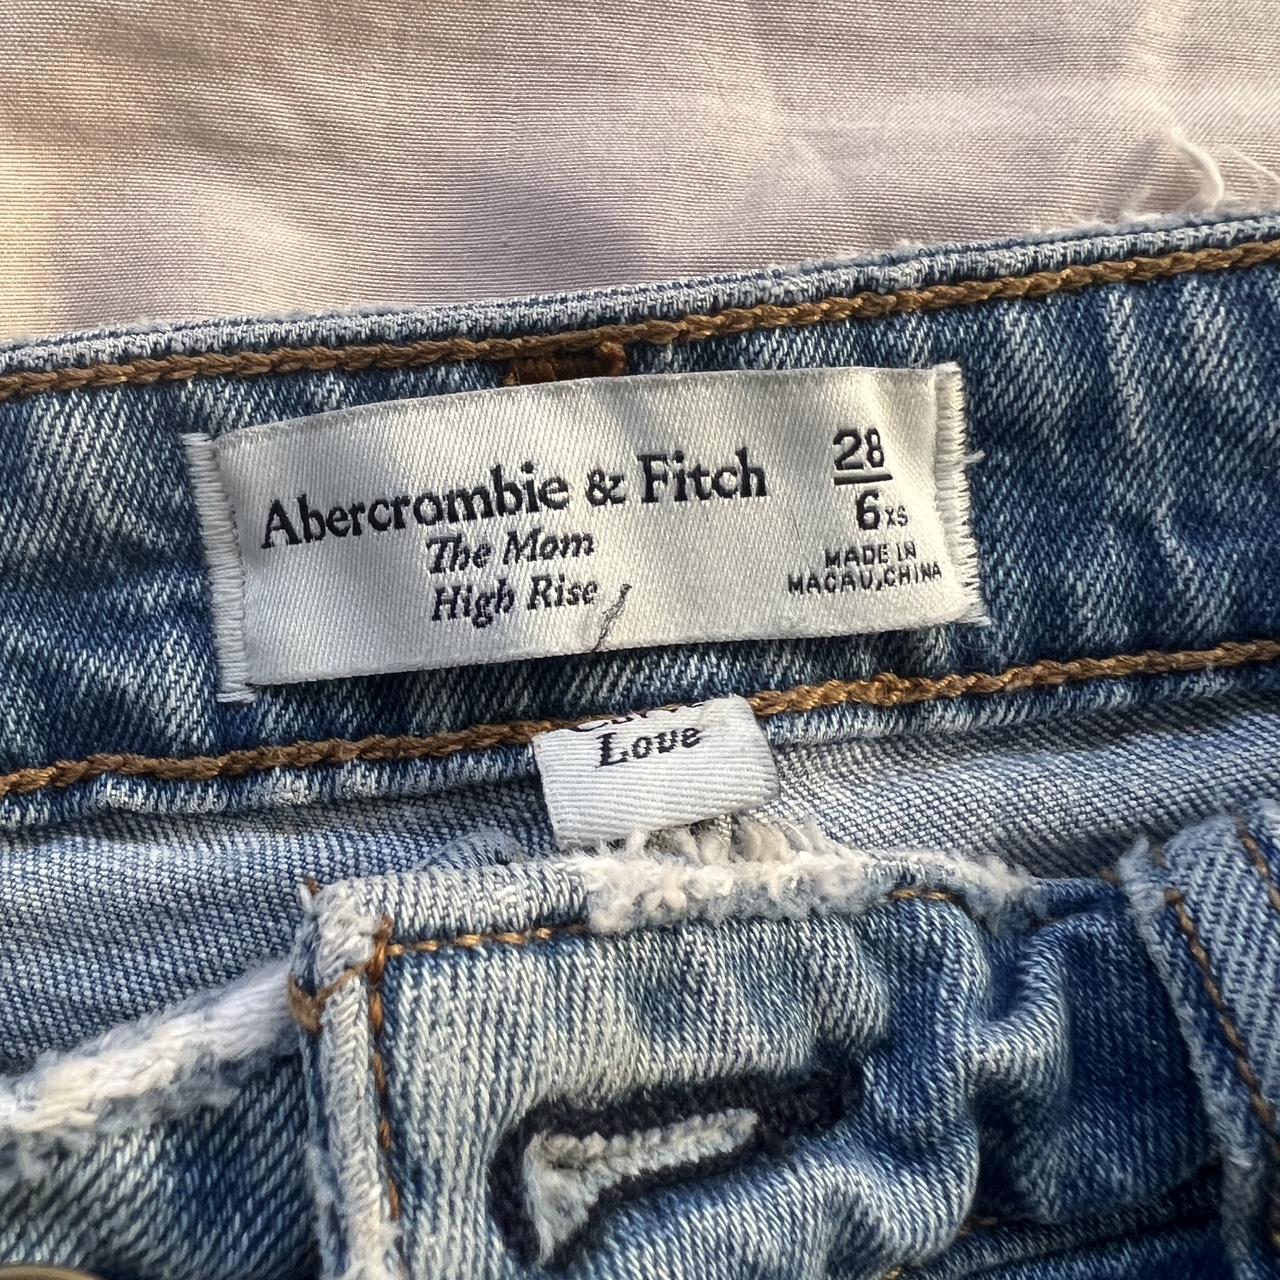 Abercrombie & Fitch Curve Love Mom Jeans, 28 extra... - Depop